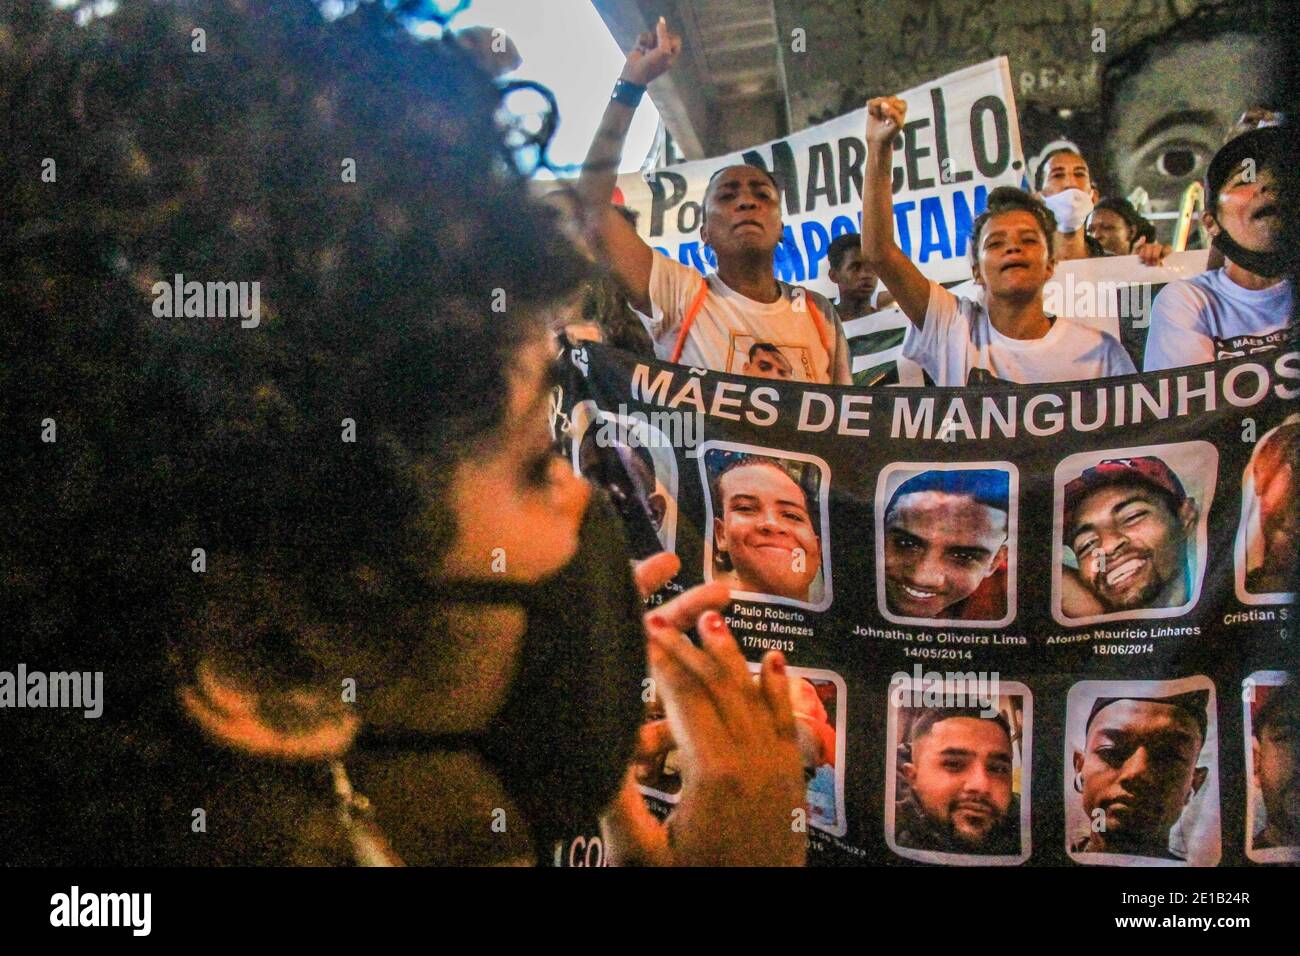 Rio, Brazil. January 5, 2021: RIO DE JANEIRO. BRAZIL. January 5, 2021. PROTEST Friends and relatives of victims of violence in Rio protest against the death of Marcelo GuimarÃ£es, shot in JacarÃ¡pagua, west zone, when he was going to work by motorcycle. Marcelo's family and community residents accuse military police of shooting the man. Credit: Ellan Lustosa/ZUMA Wire/Alamy Live News Stock Photo